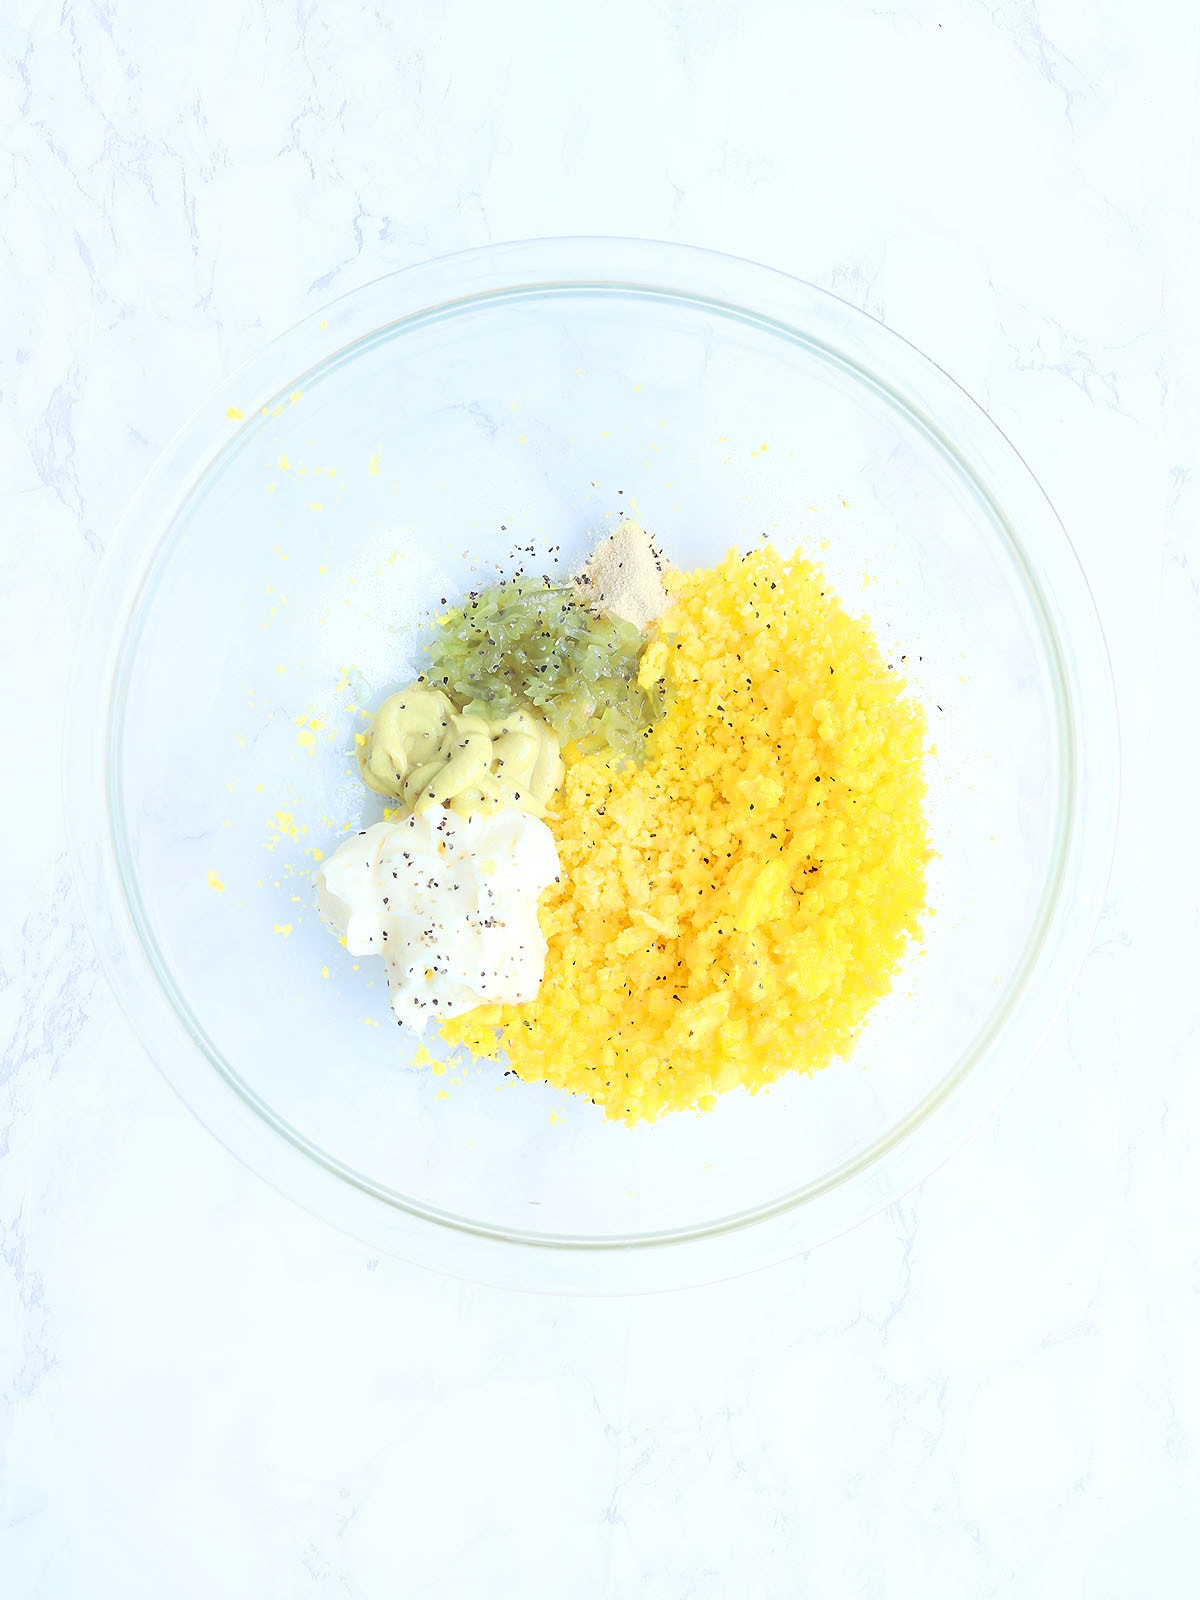 Deviled egg ingredients in a mixing bowl before they have been mixed together.